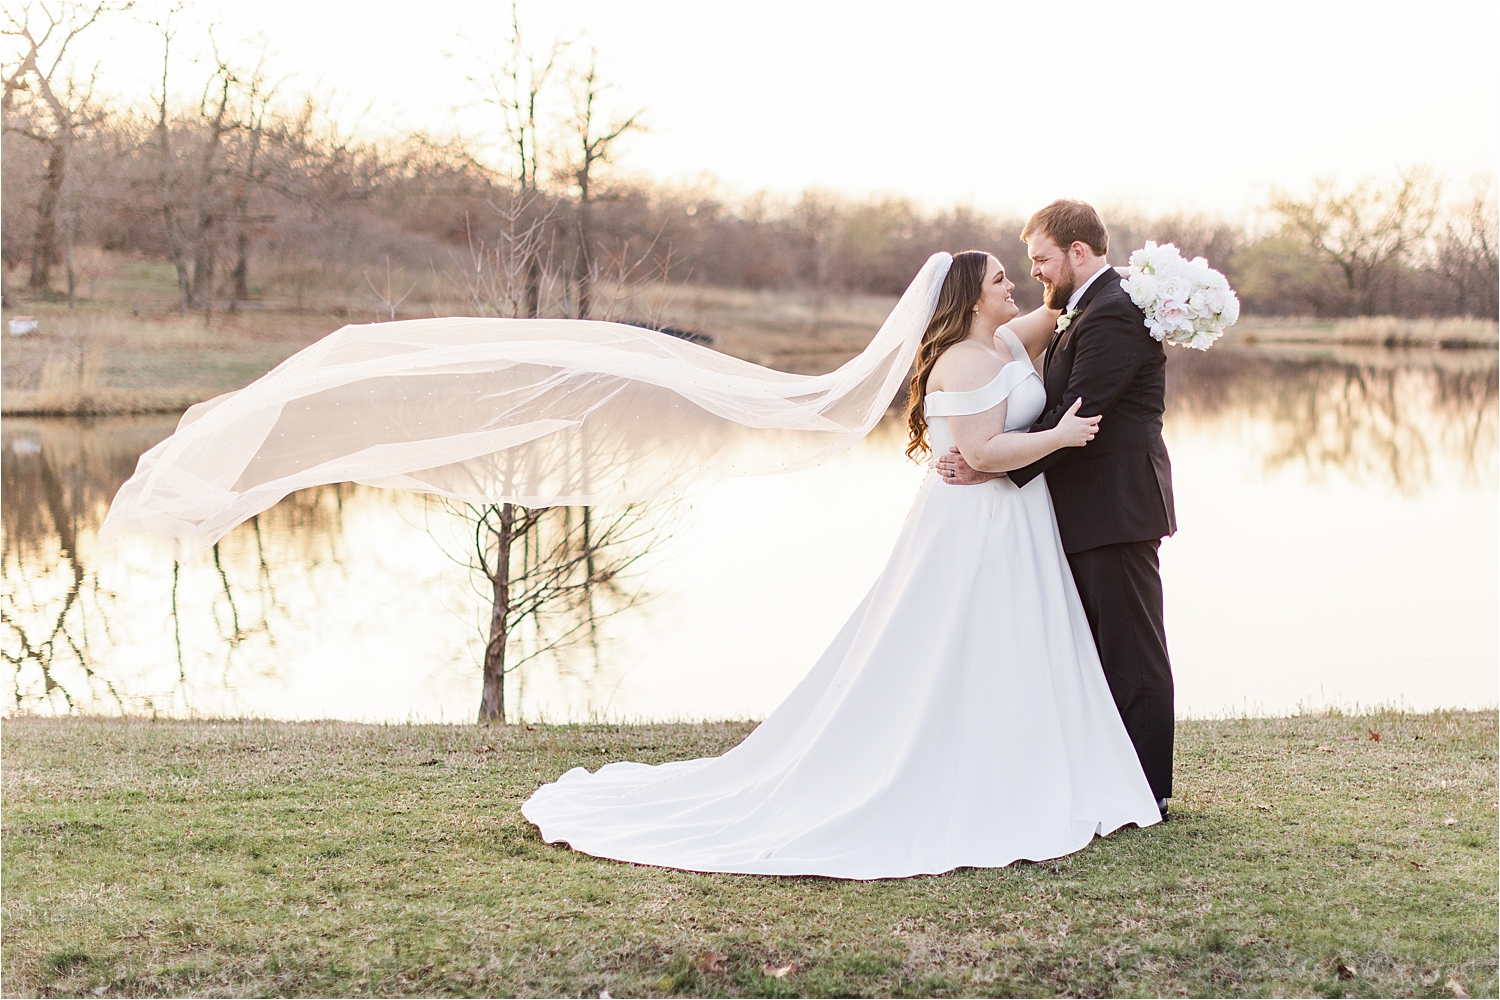 A Dream Point Ranch Wedding portrait down by the water during a glow-y sunset. 